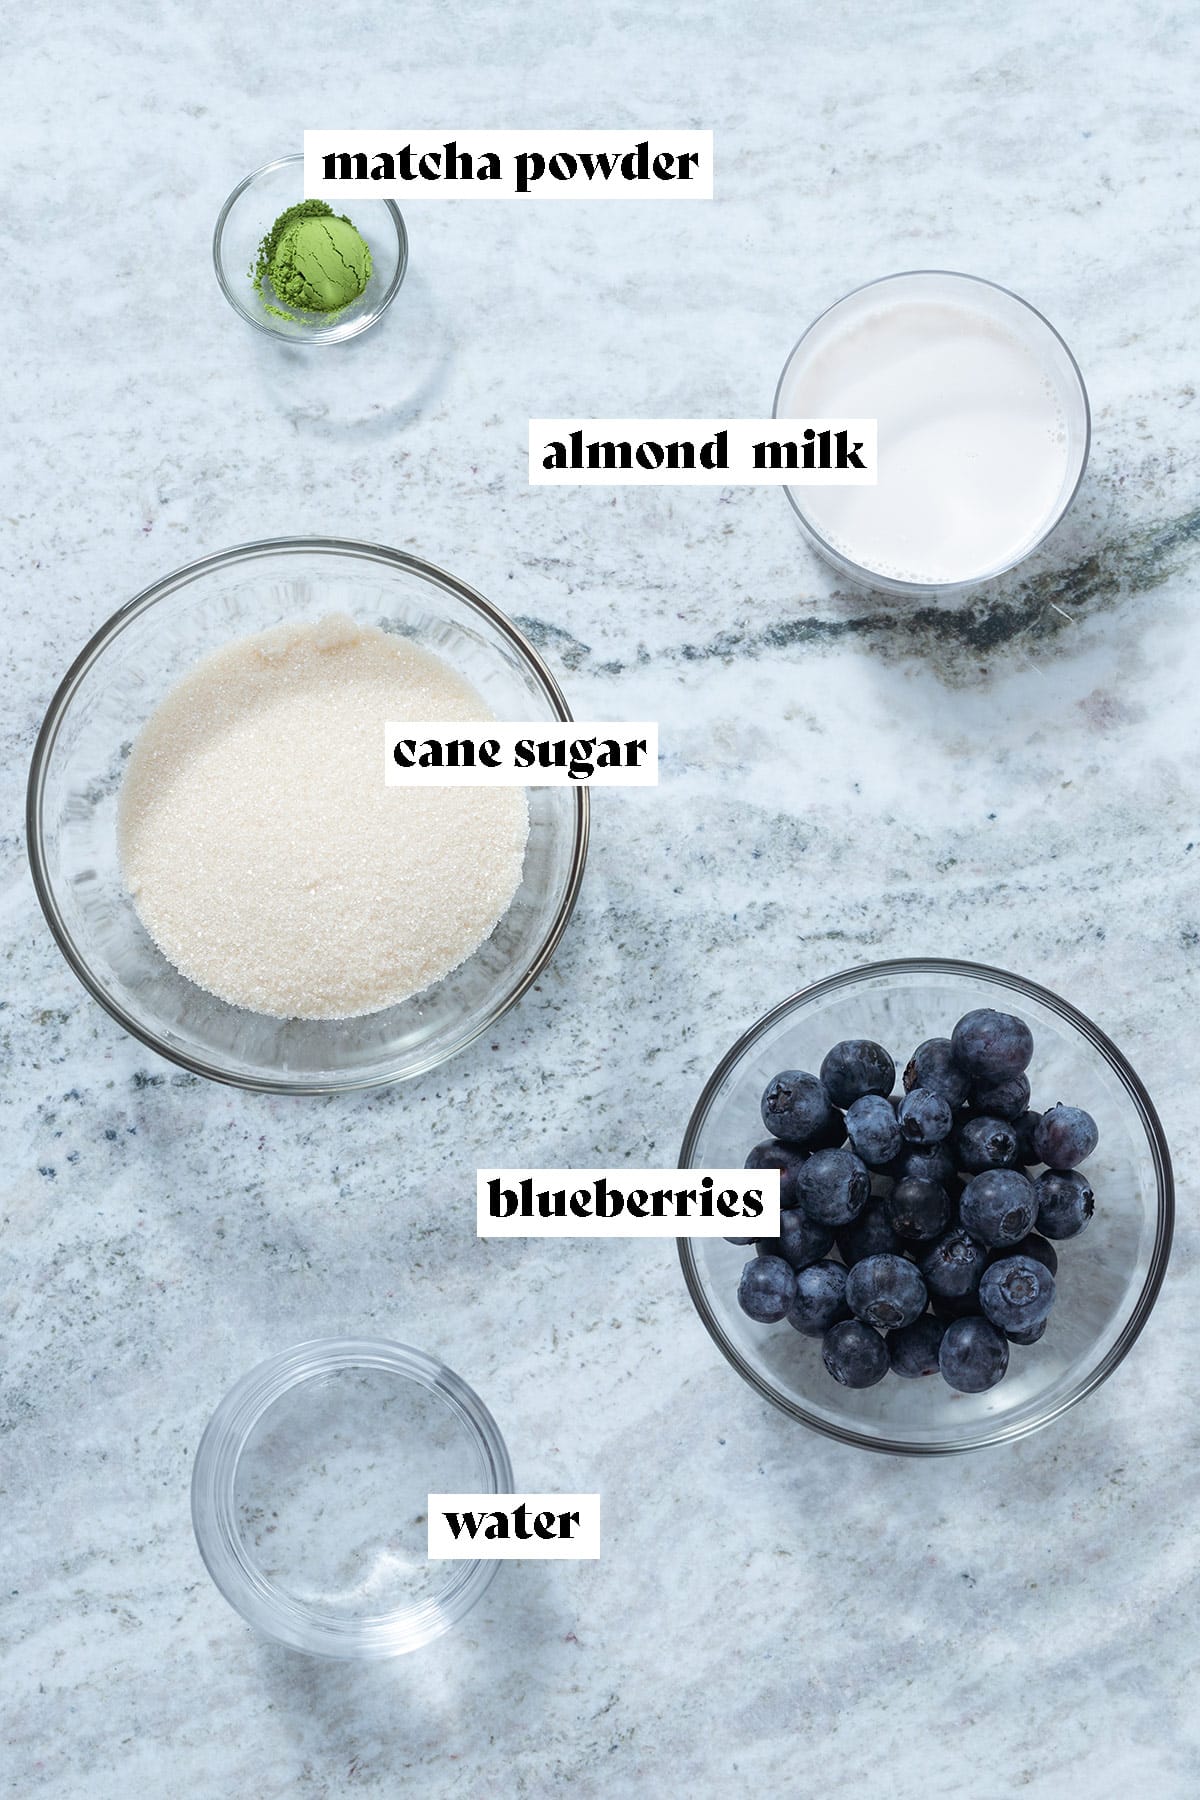 Blueberries, cane sugar, matcha powder, water, and almond milk laid out on a grey stone background.